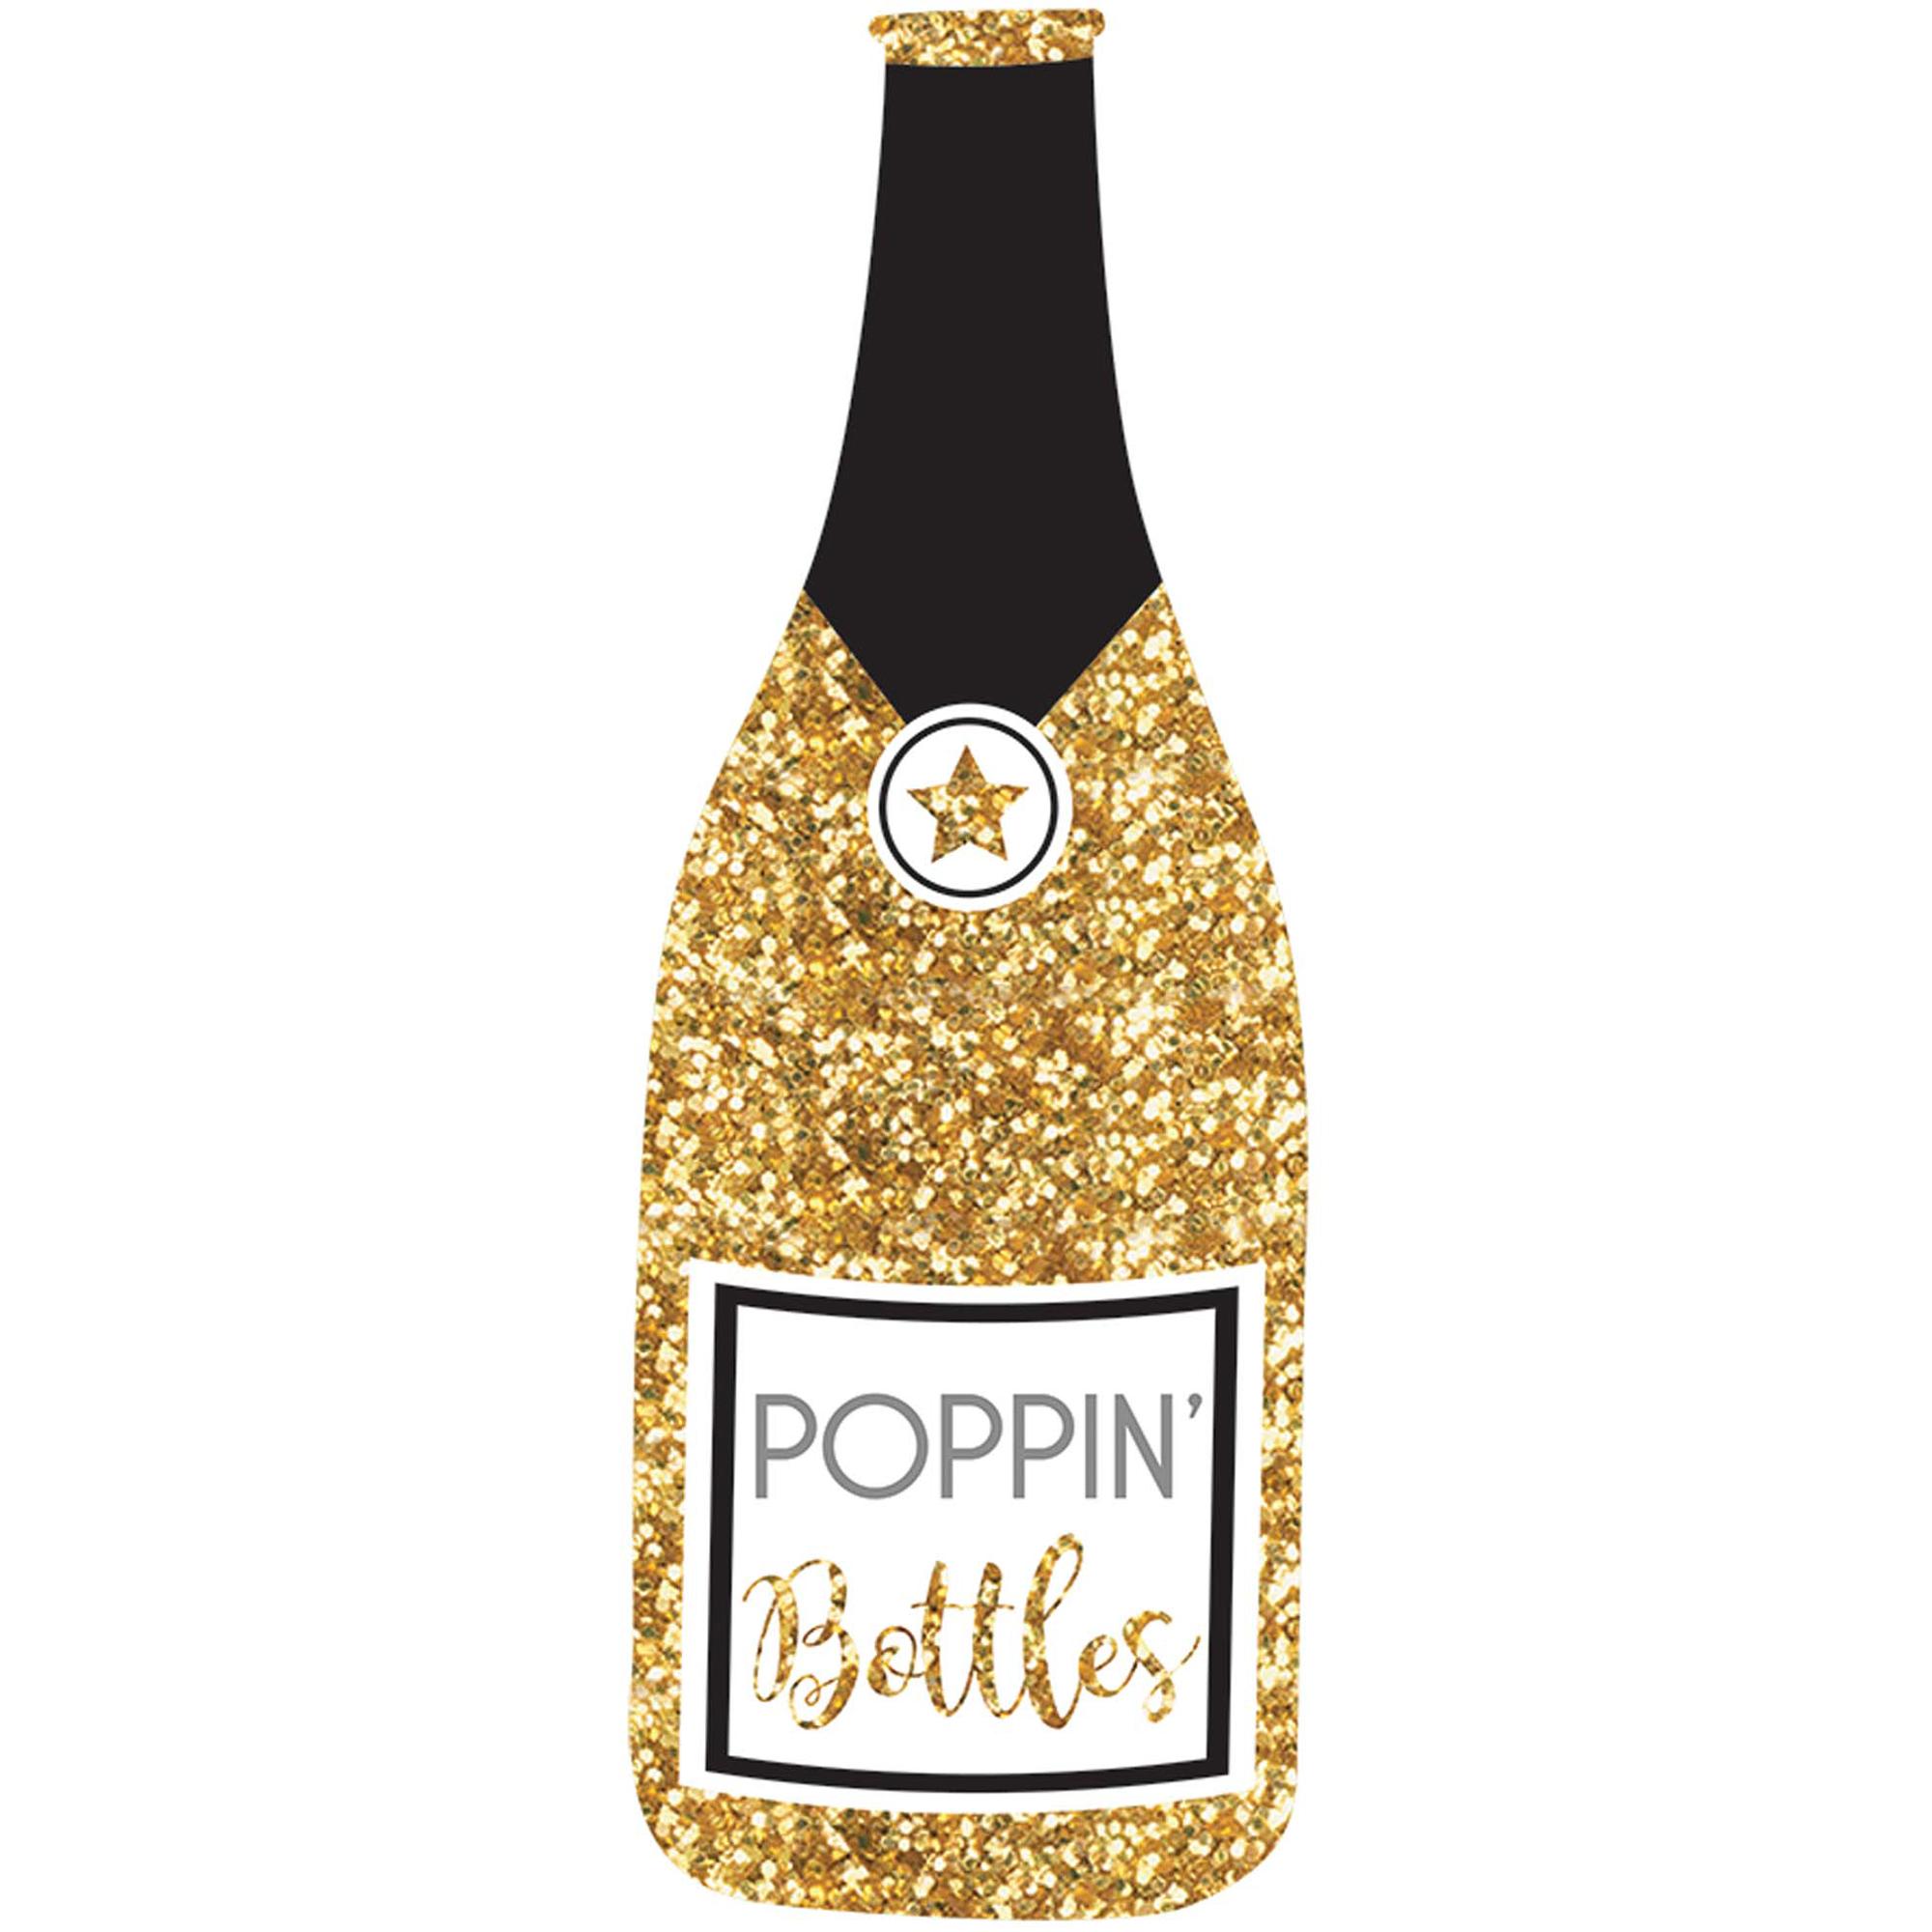 Jumbo Bubbly Bottle Photo Prop Party Accessories - Party Centre